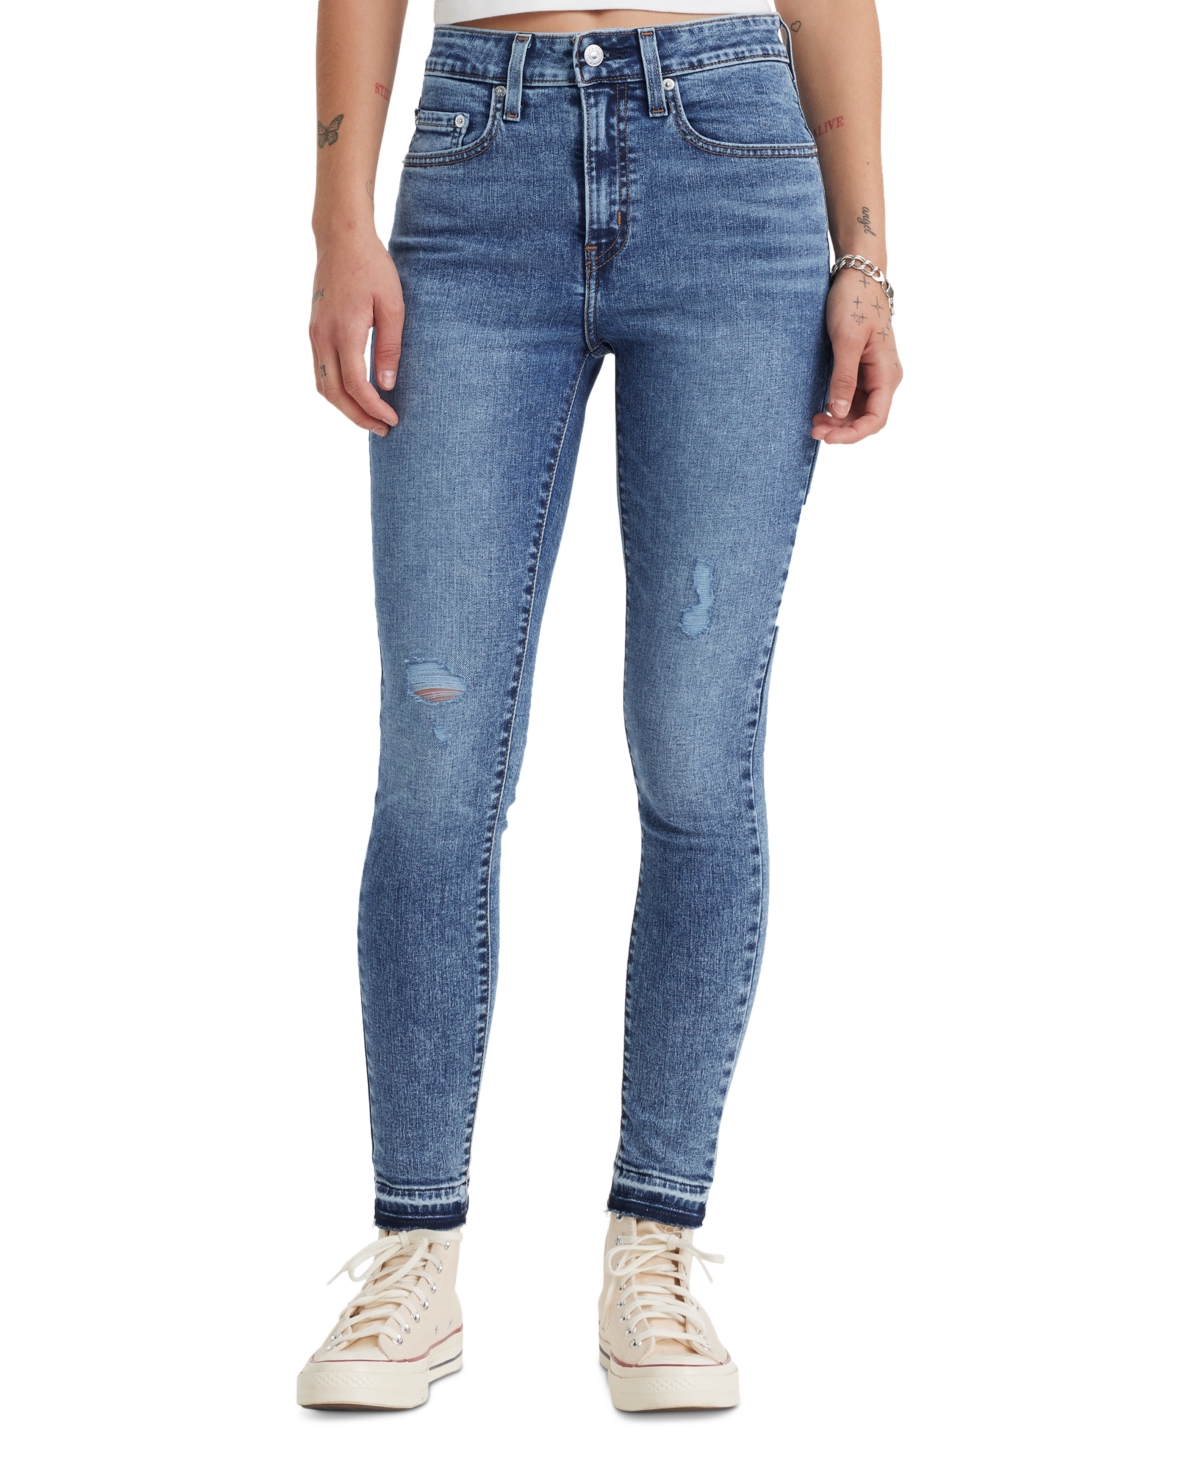 Levi's 721 Skinny Jeans In Easy Does It Now